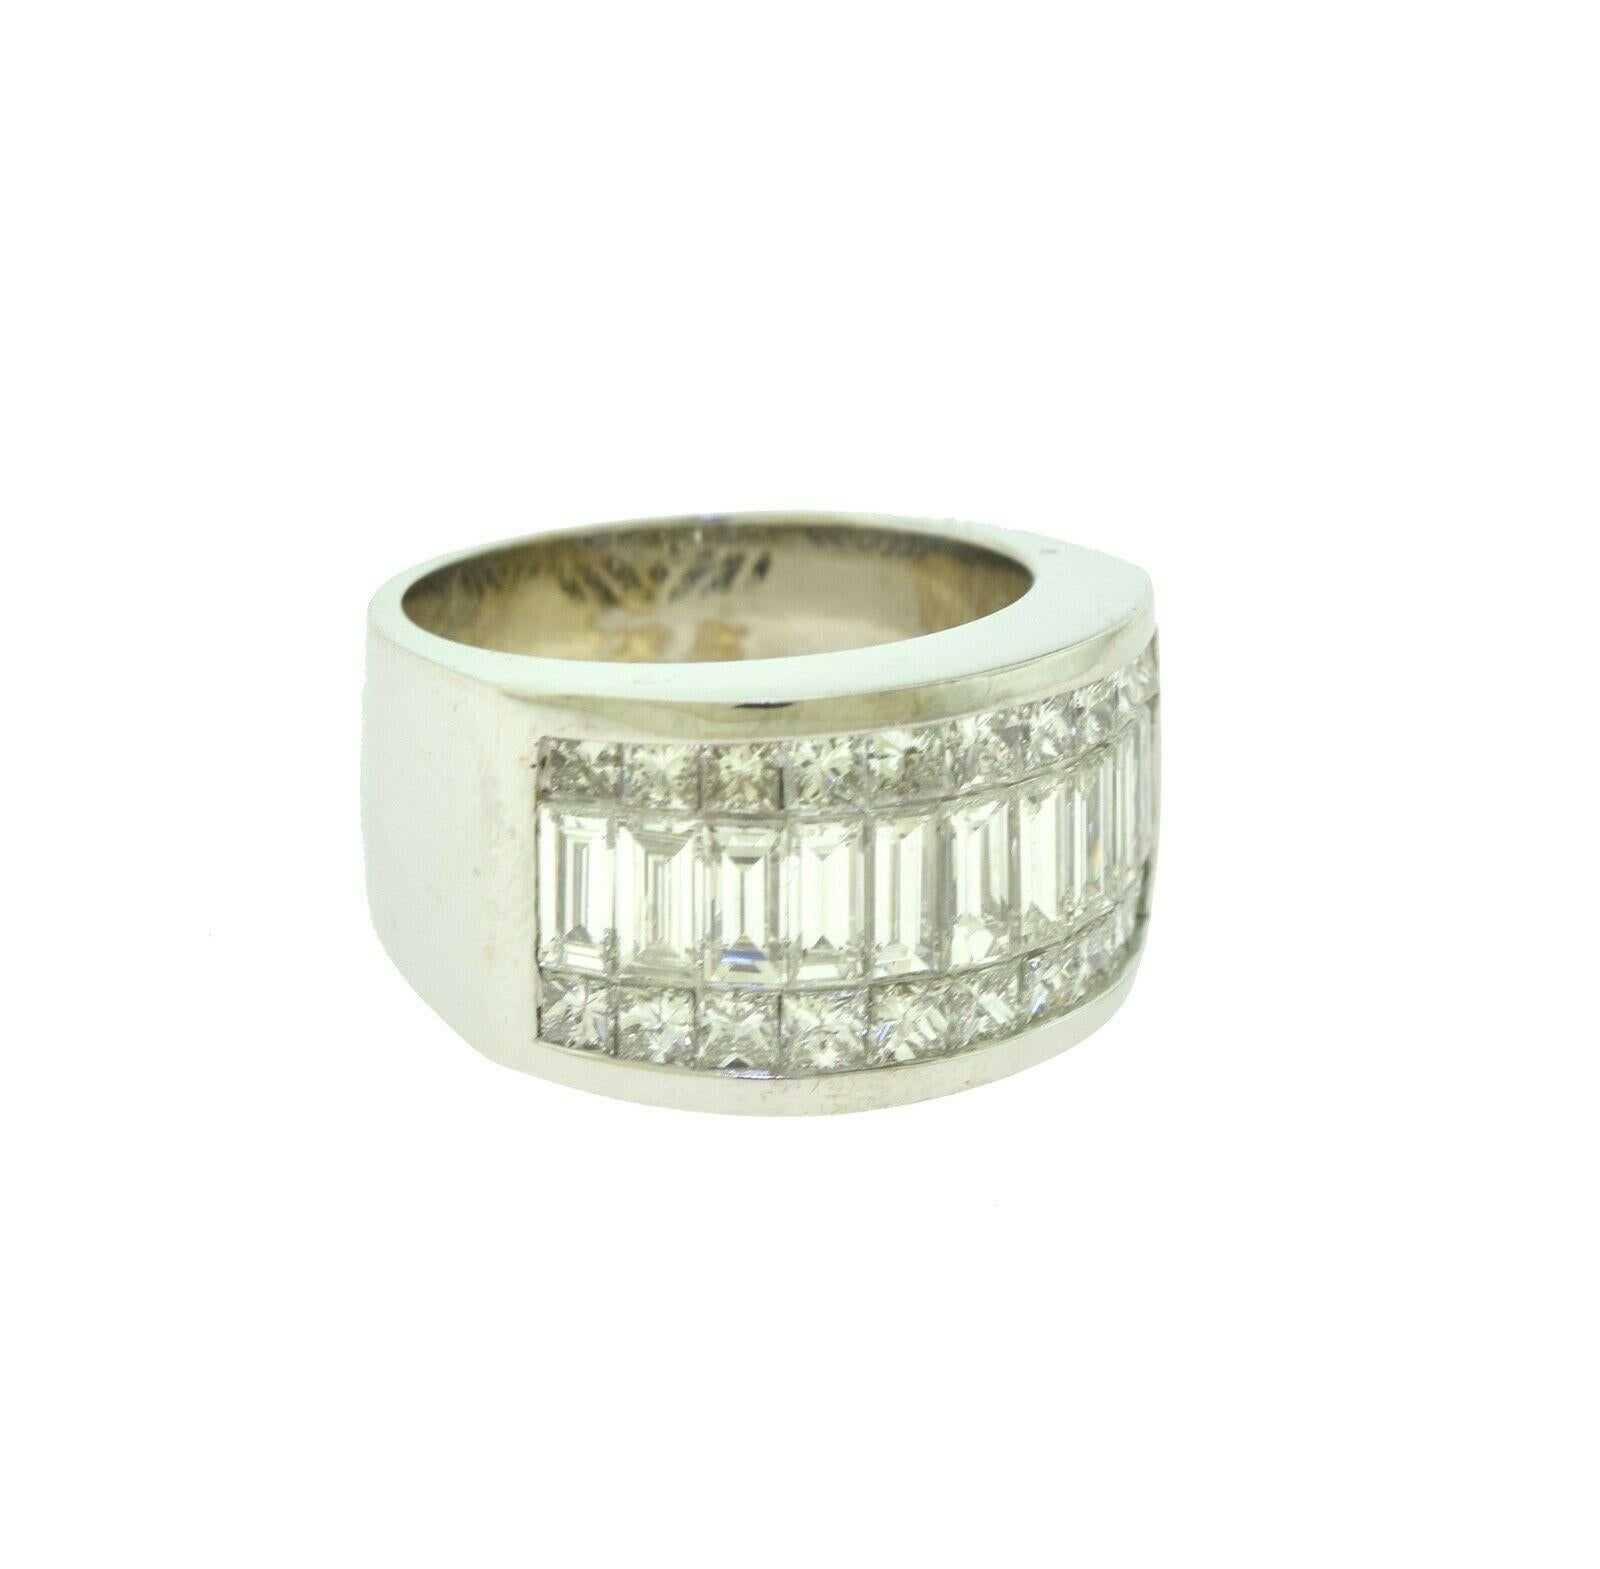 Style: Band

Material: White Gold

Metal Purity: 18K

Stones:   20 Princess Cut Diamond

10 Emerald Cut Diamonds

Ring Size:  6 ( Sizable)

Diamond Clarity: VS

Diamond Color: I

Total Item Weight (g): 14.6

Dimensions:  .9 x 1 inches

Ring